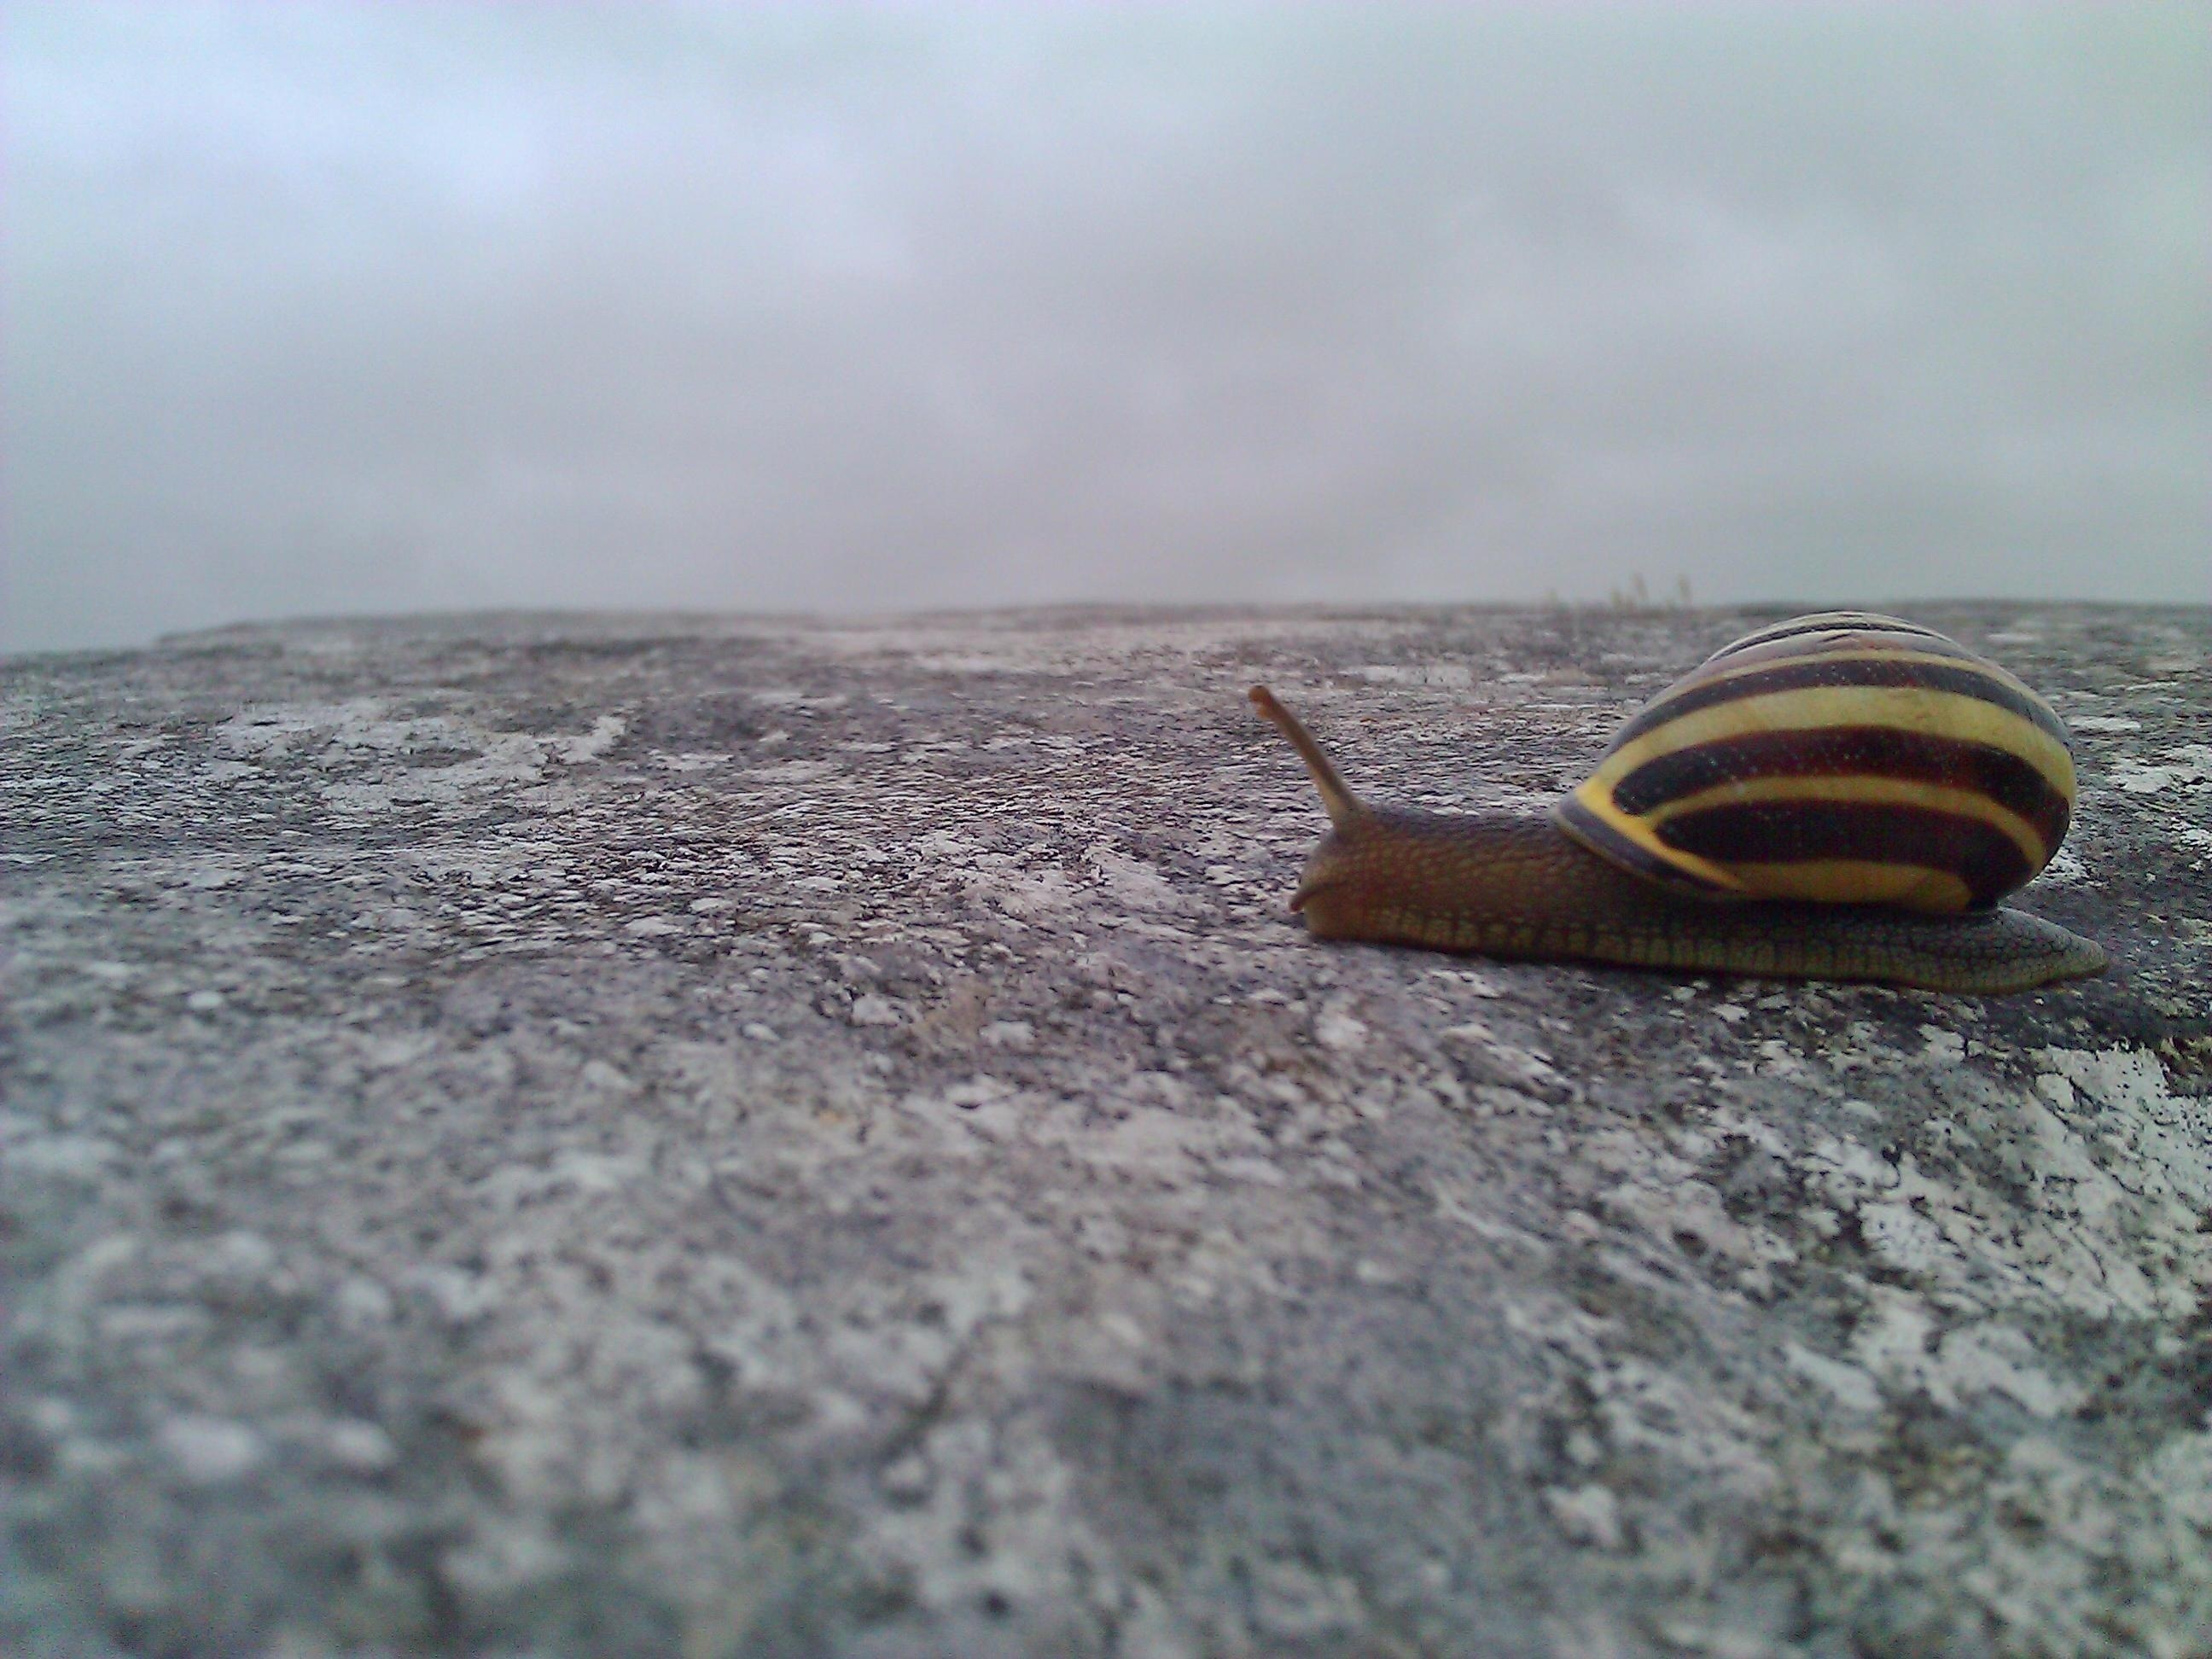 brown and gray snail